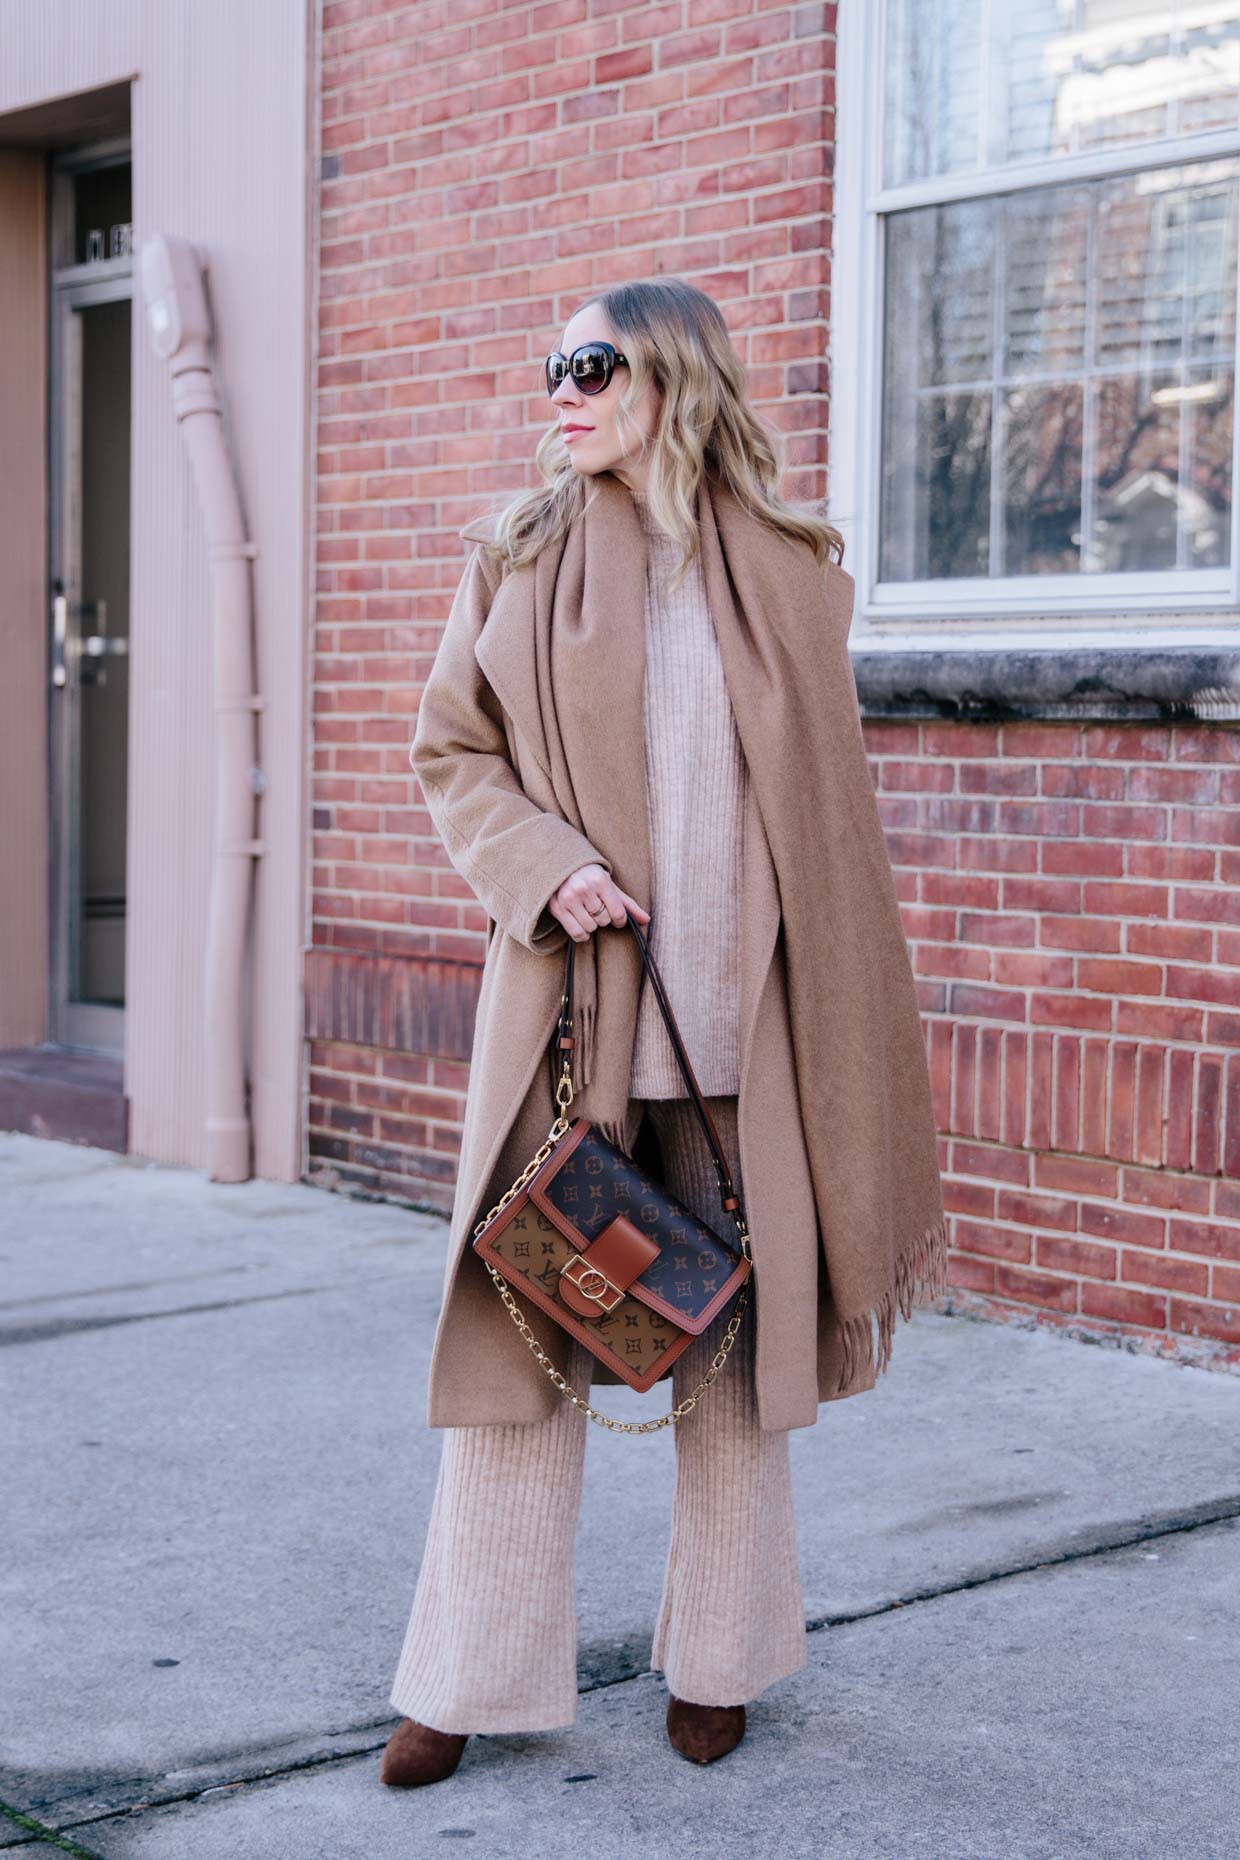 Max Mara Manuela camel coat outfit with Gucci Marmont logo belt, black  straight leg jeans and pointy toe leather sock boots - Meagan's Moda